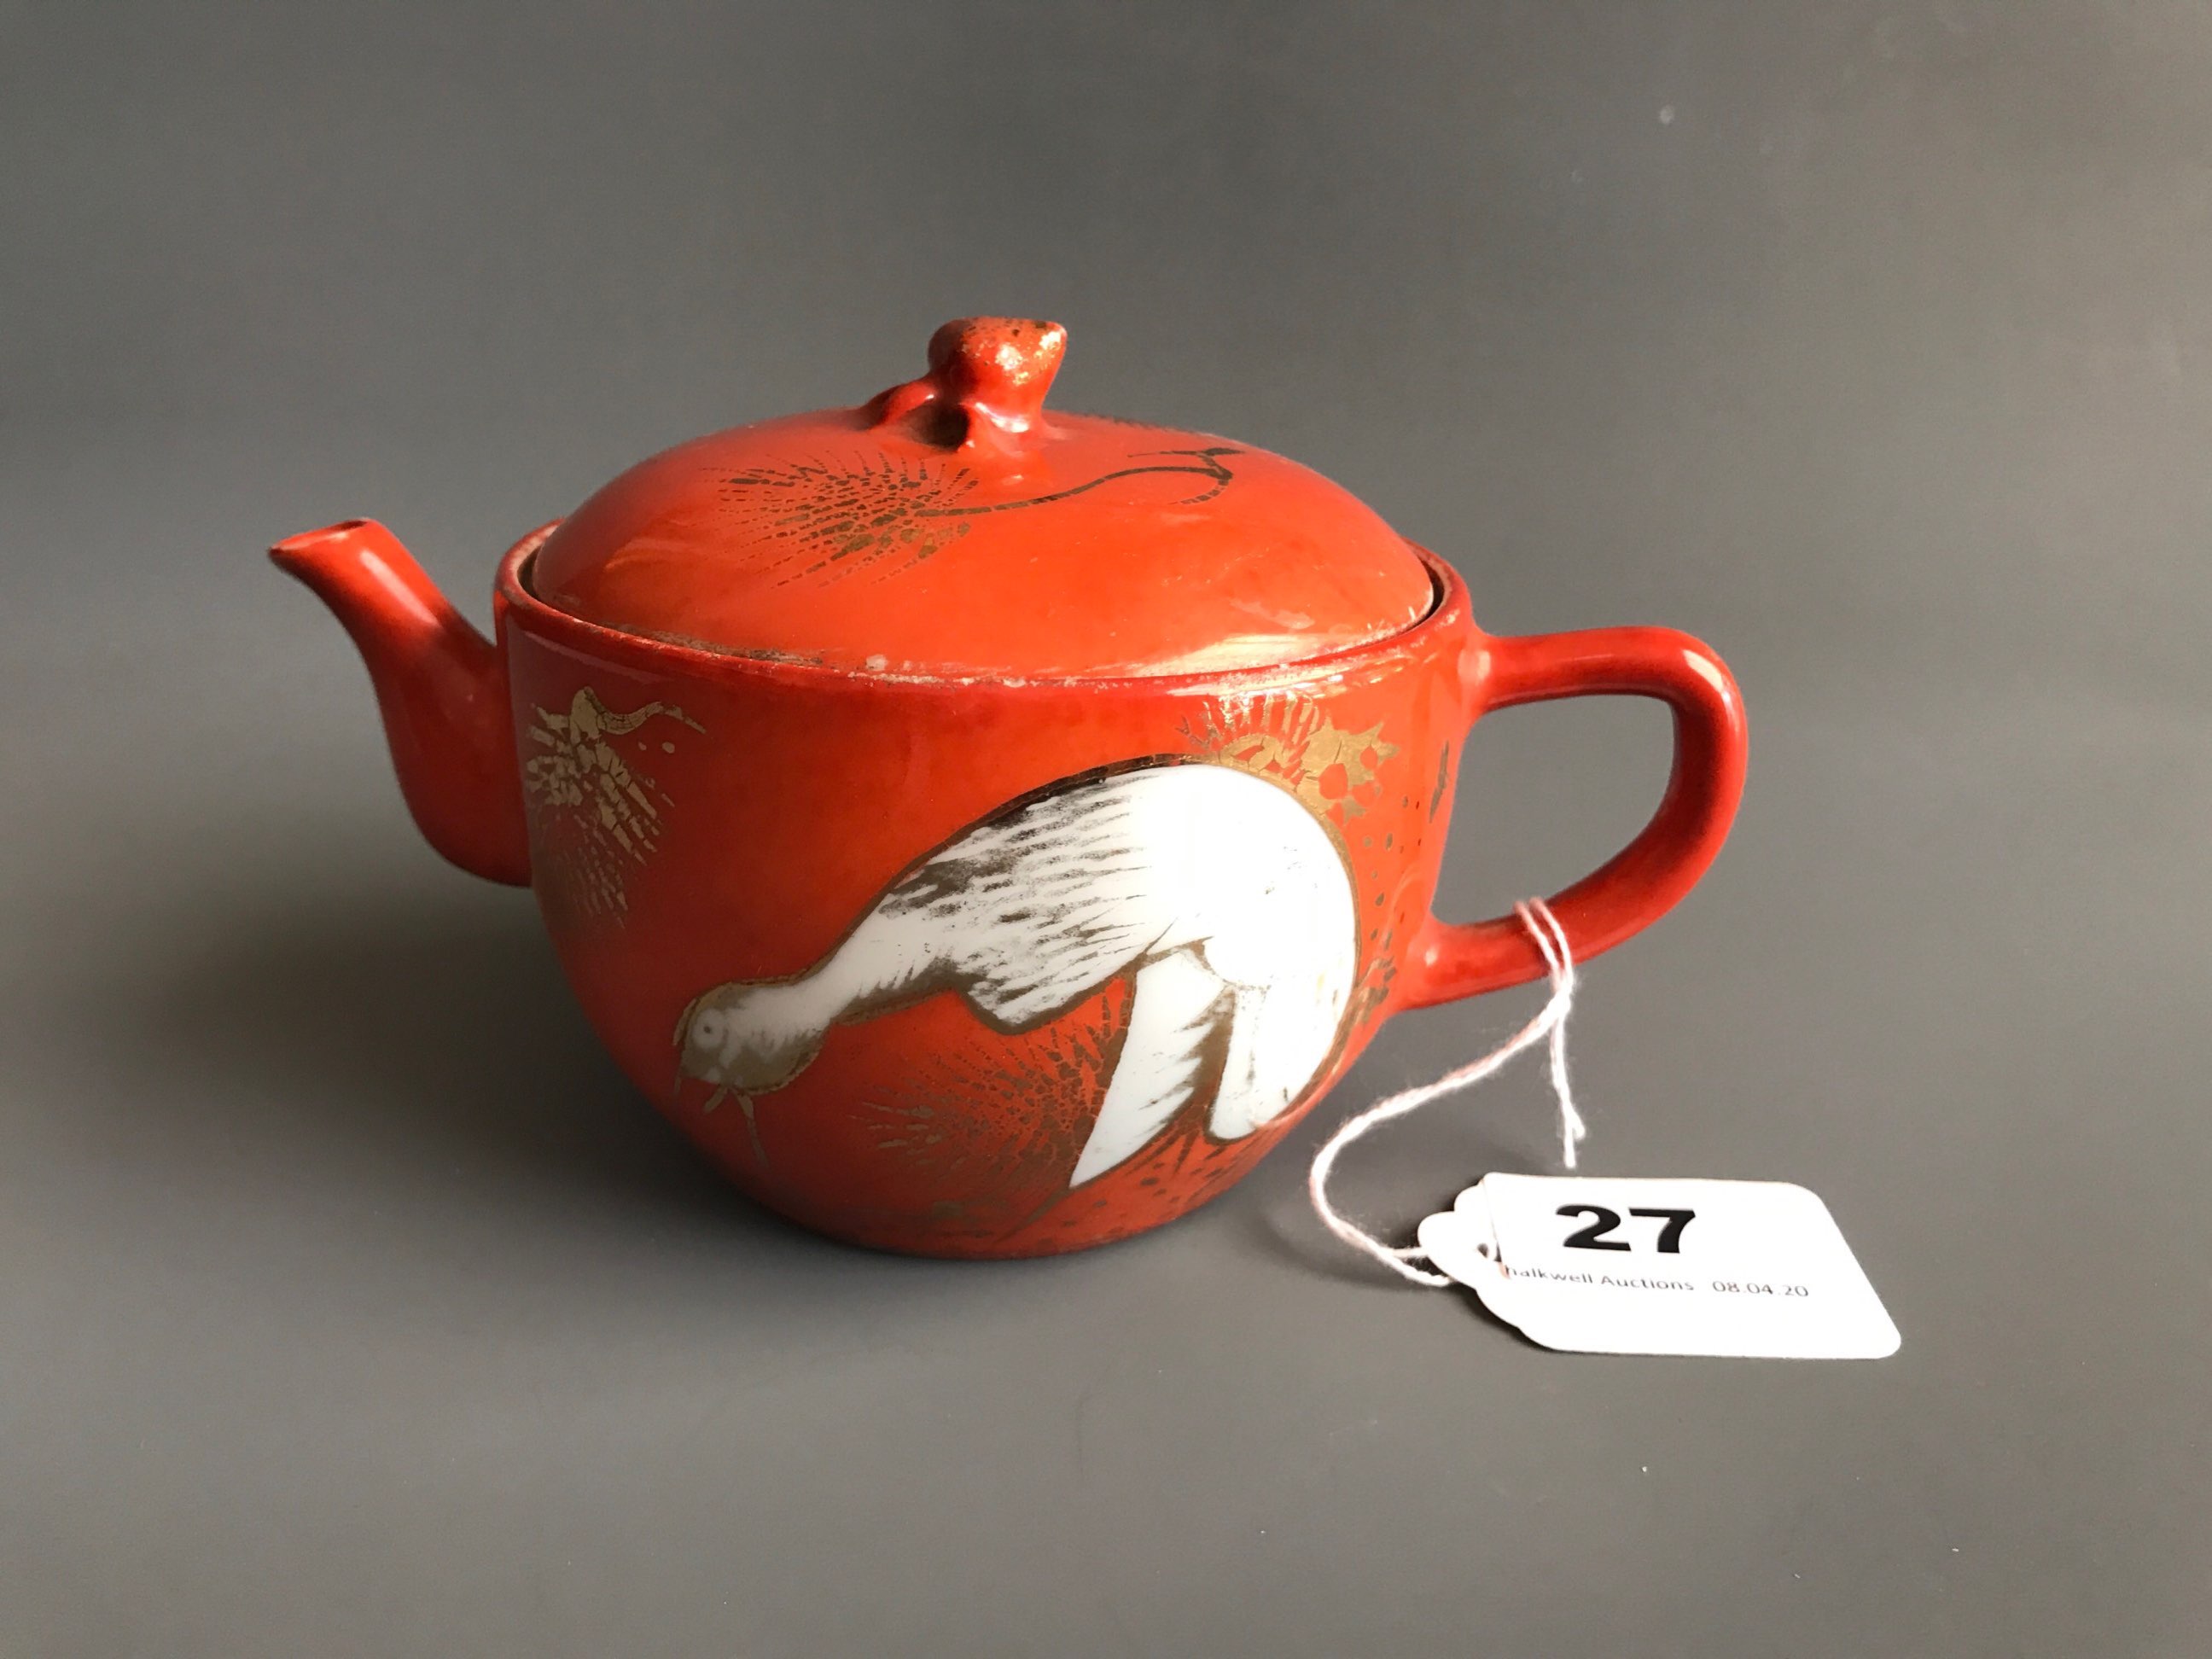 A mid 20thC Chinese Republican period porcelain teapot with orange and gilt decoration of a crane.